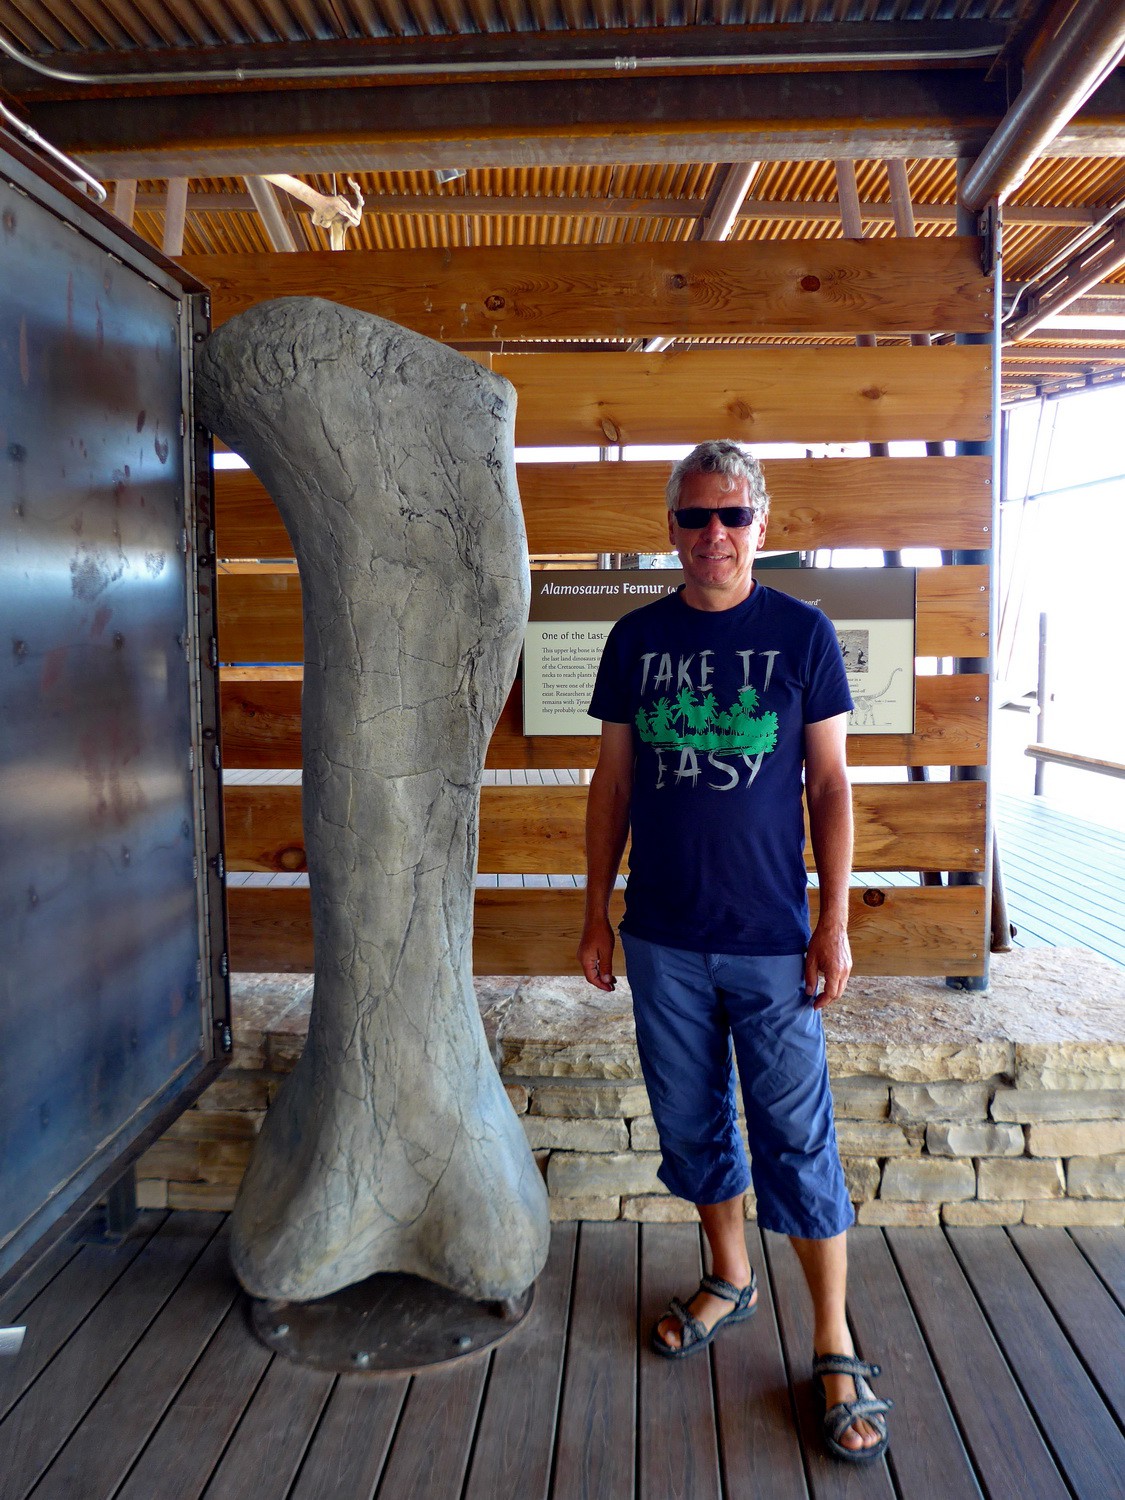 Femur of an Almosaurus, one the last and largest Dinosaurs (up to 24 meters long and 29,000 kg)